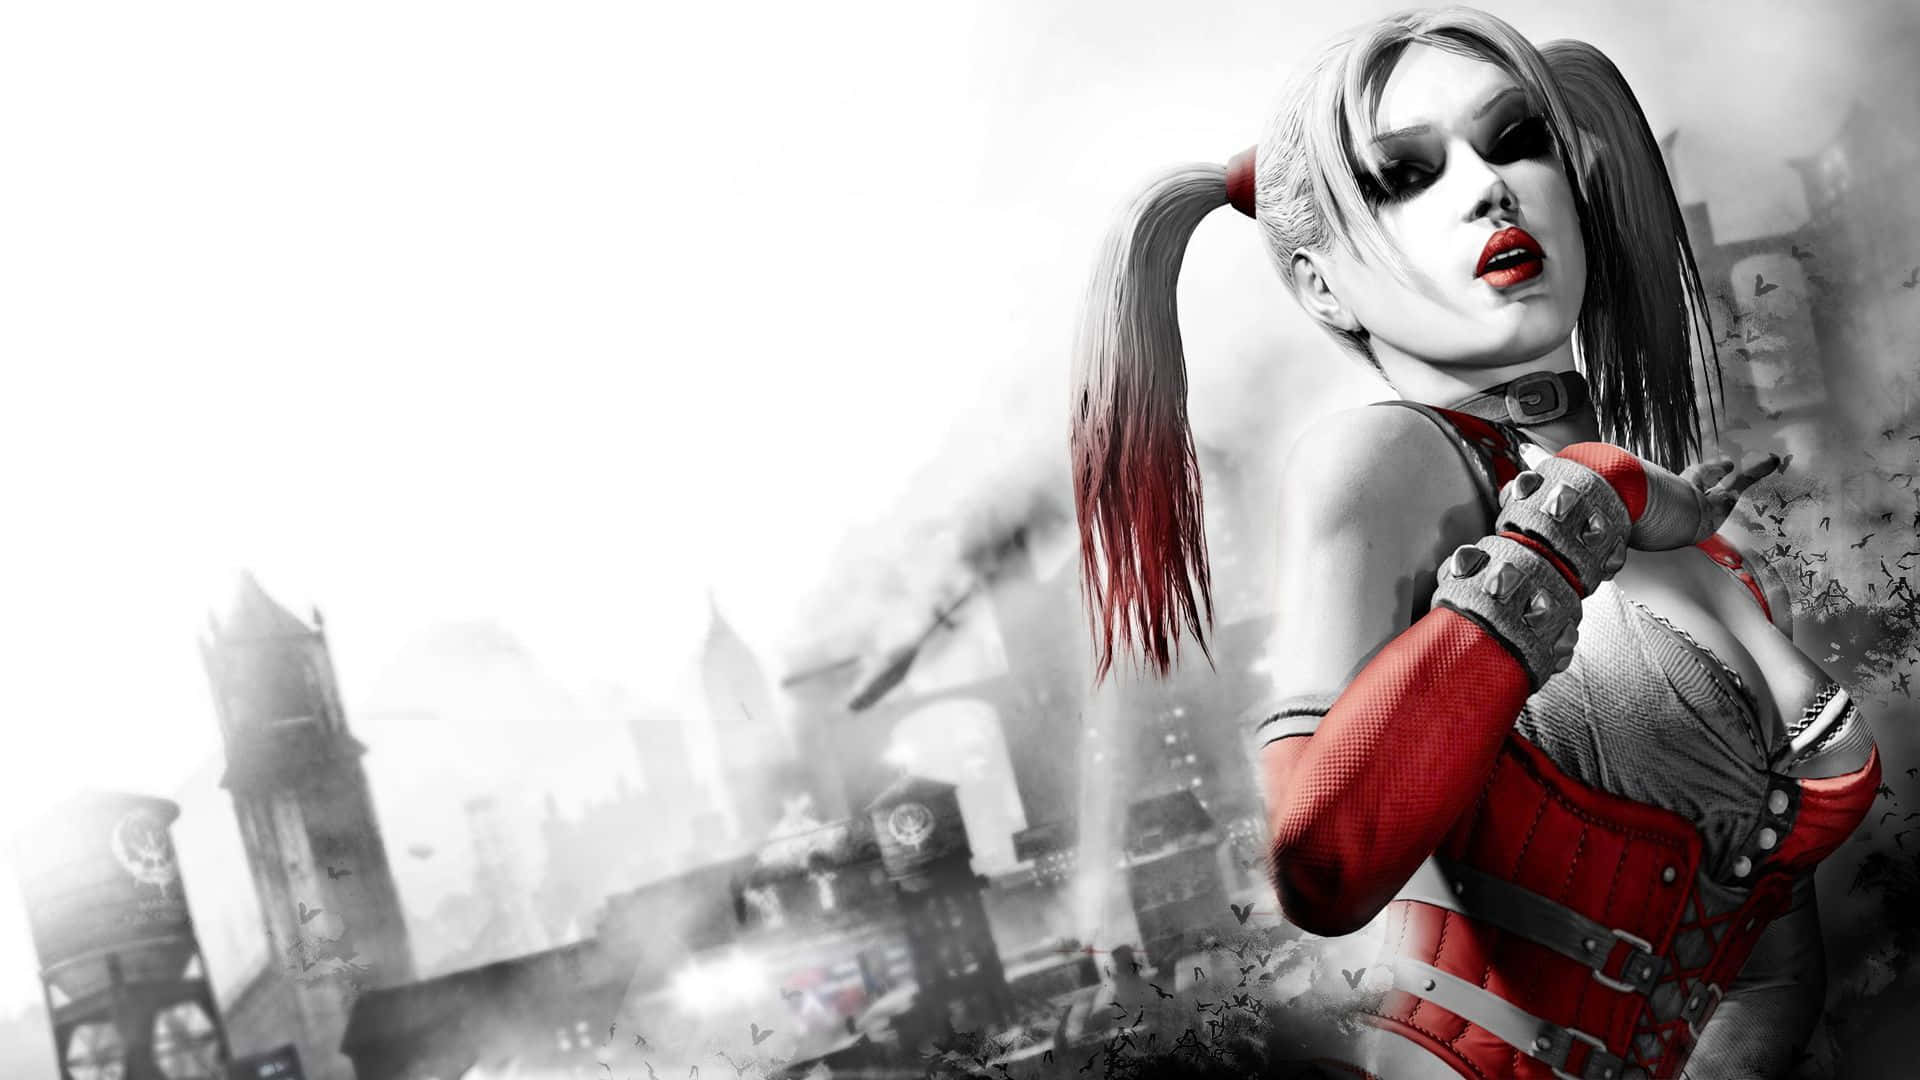 100+] Harley Quinn Arkham City Wallpapers for FREE 